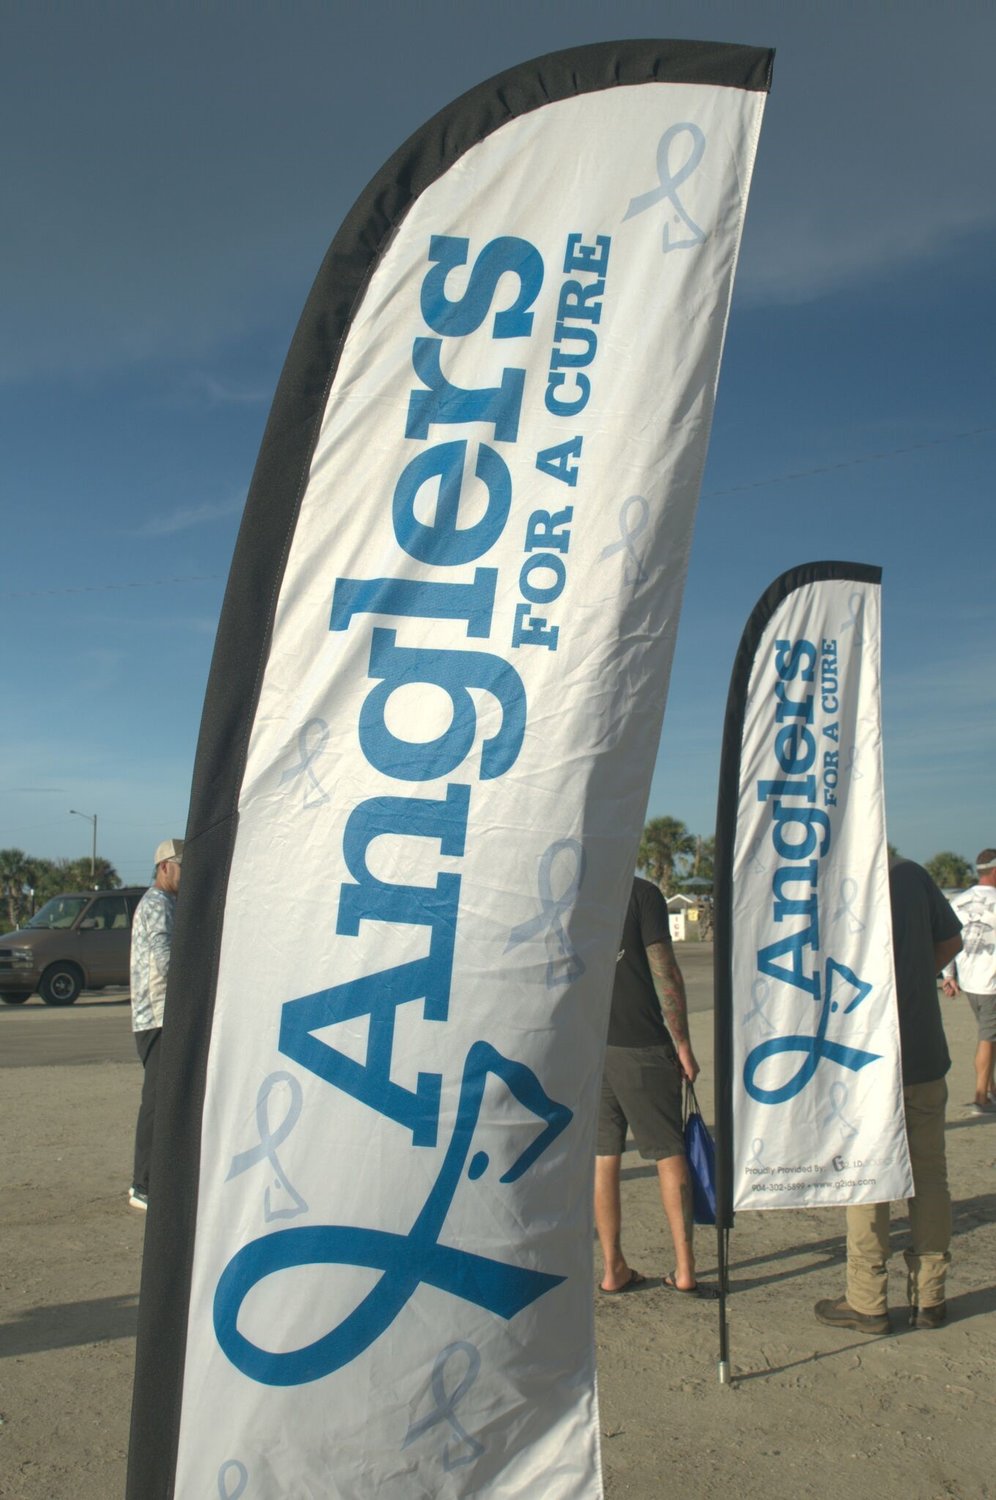 This year's Anglers for a Cure fishing tournament will be hosted at the Vilano Beach Boat Ramp on Sept. 28